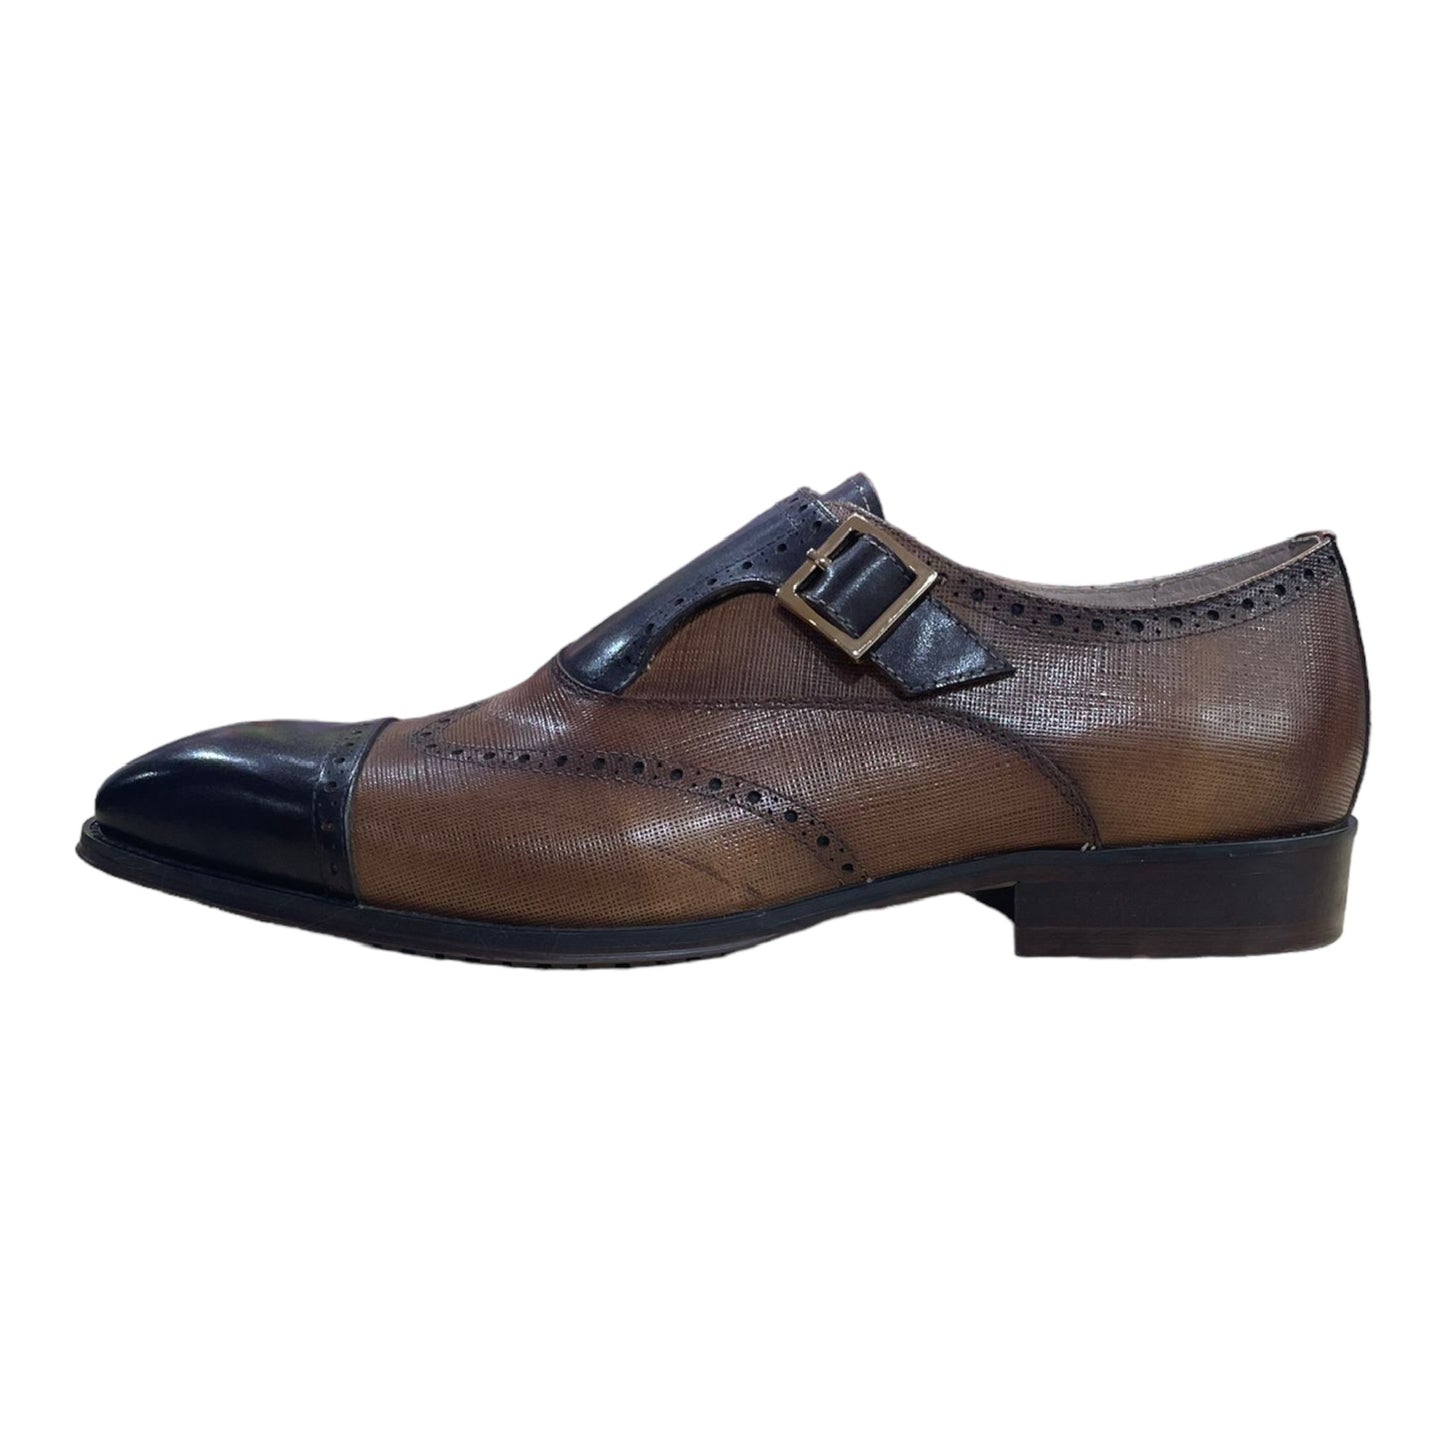 GIOVANNI: Perry Dress Shoe